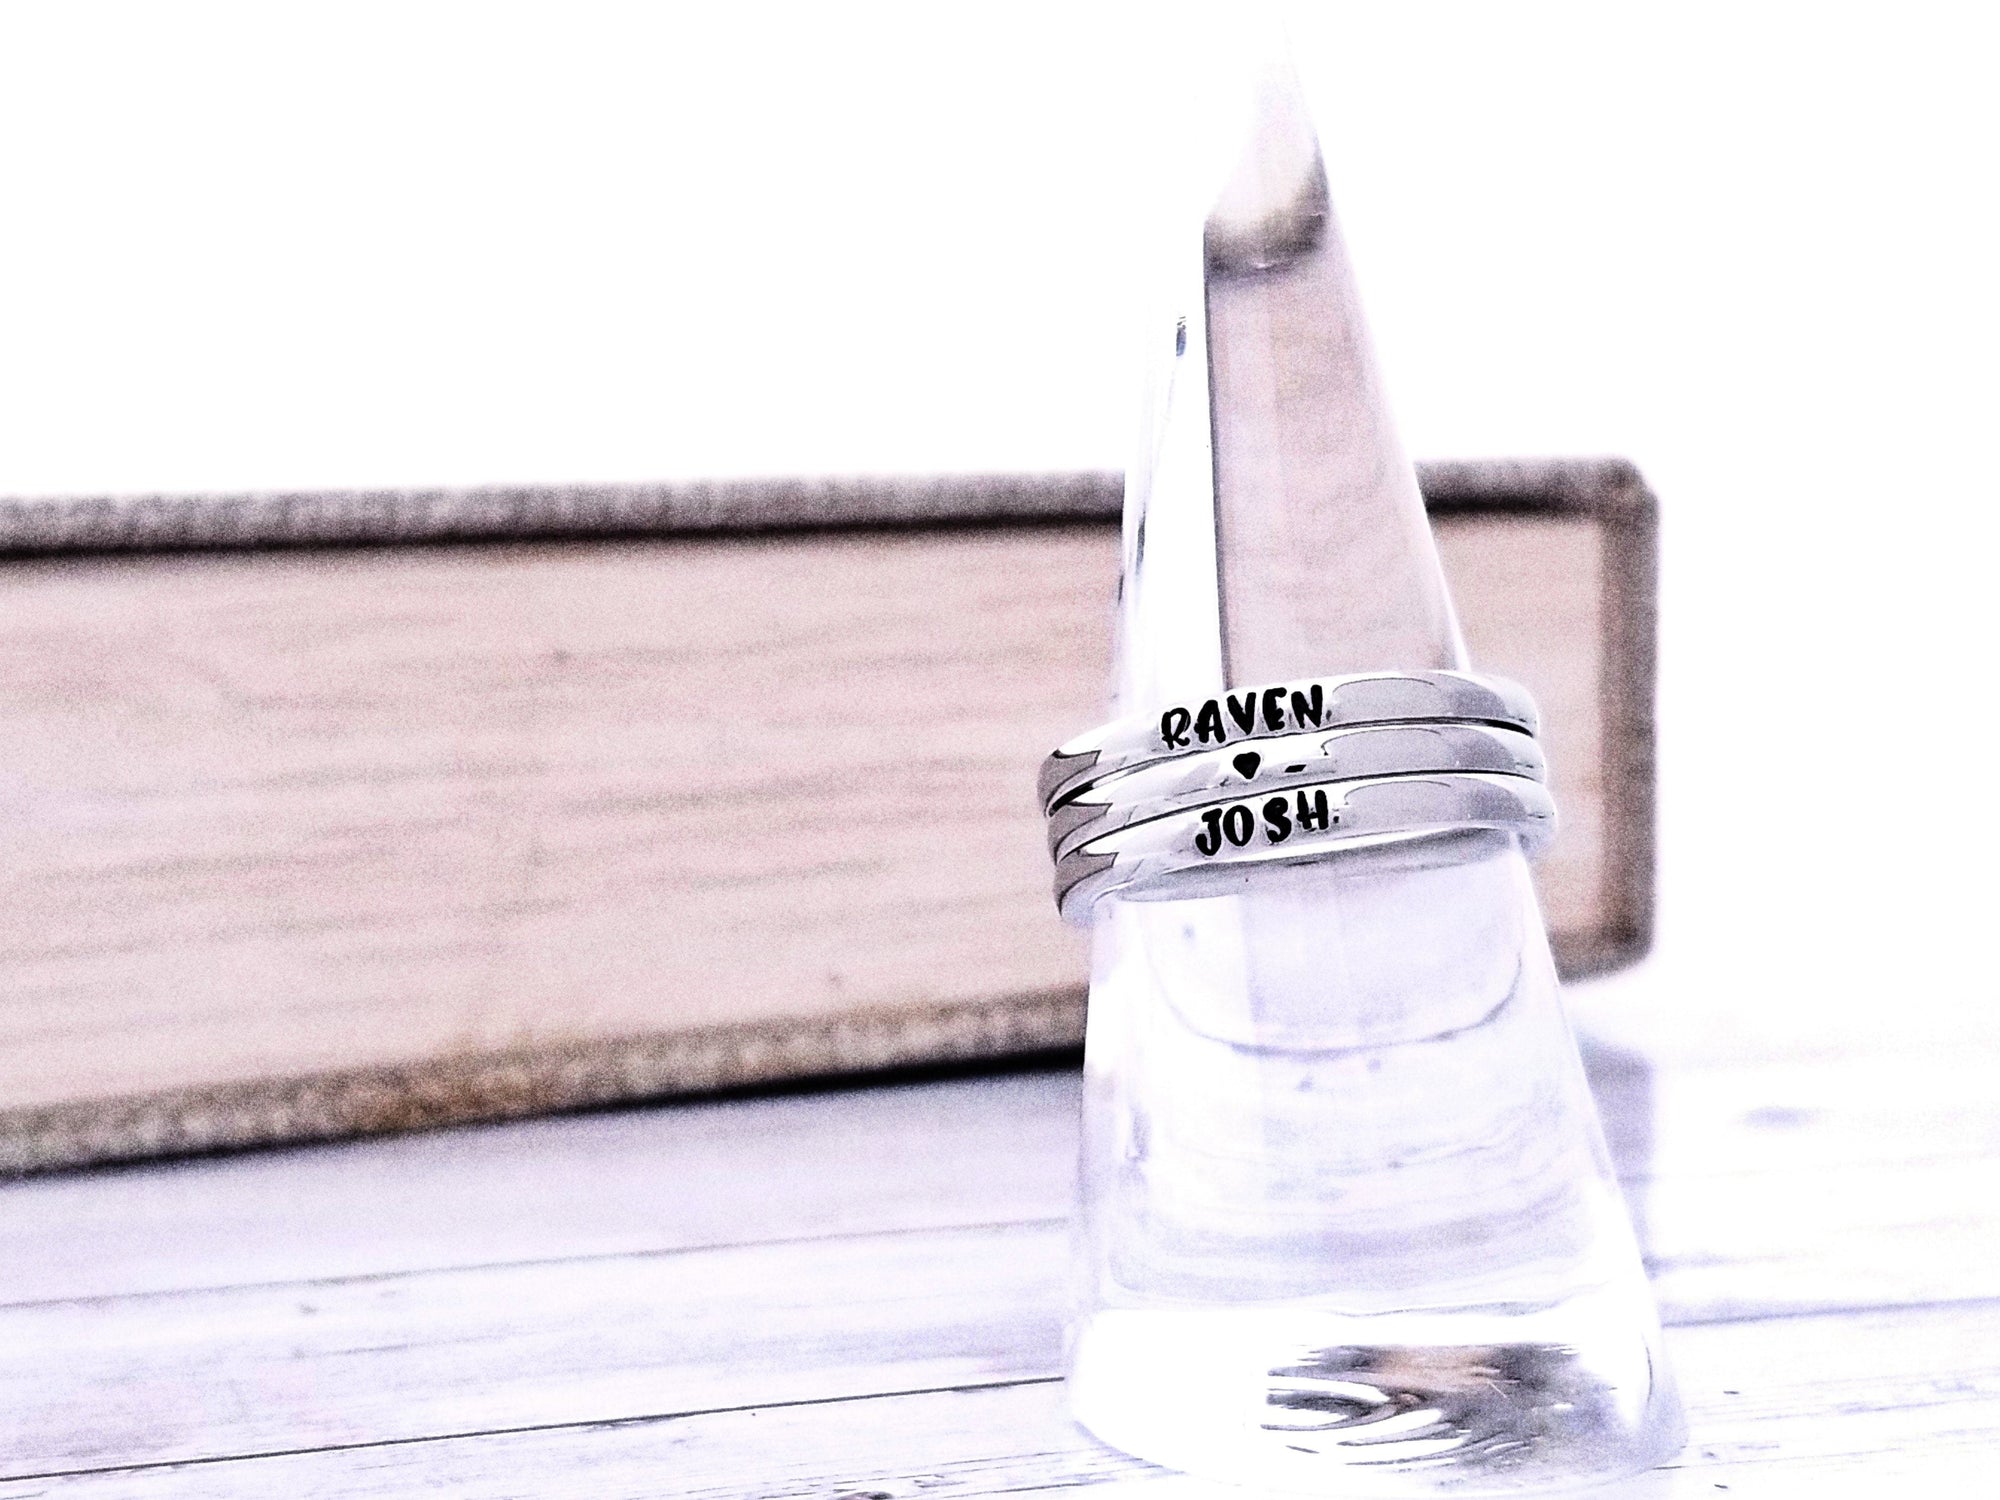 Tiny Stacking Date Ring, Custom Hand Stamped Rings, Personalized Gift, Eternity rings, Stainless Steel